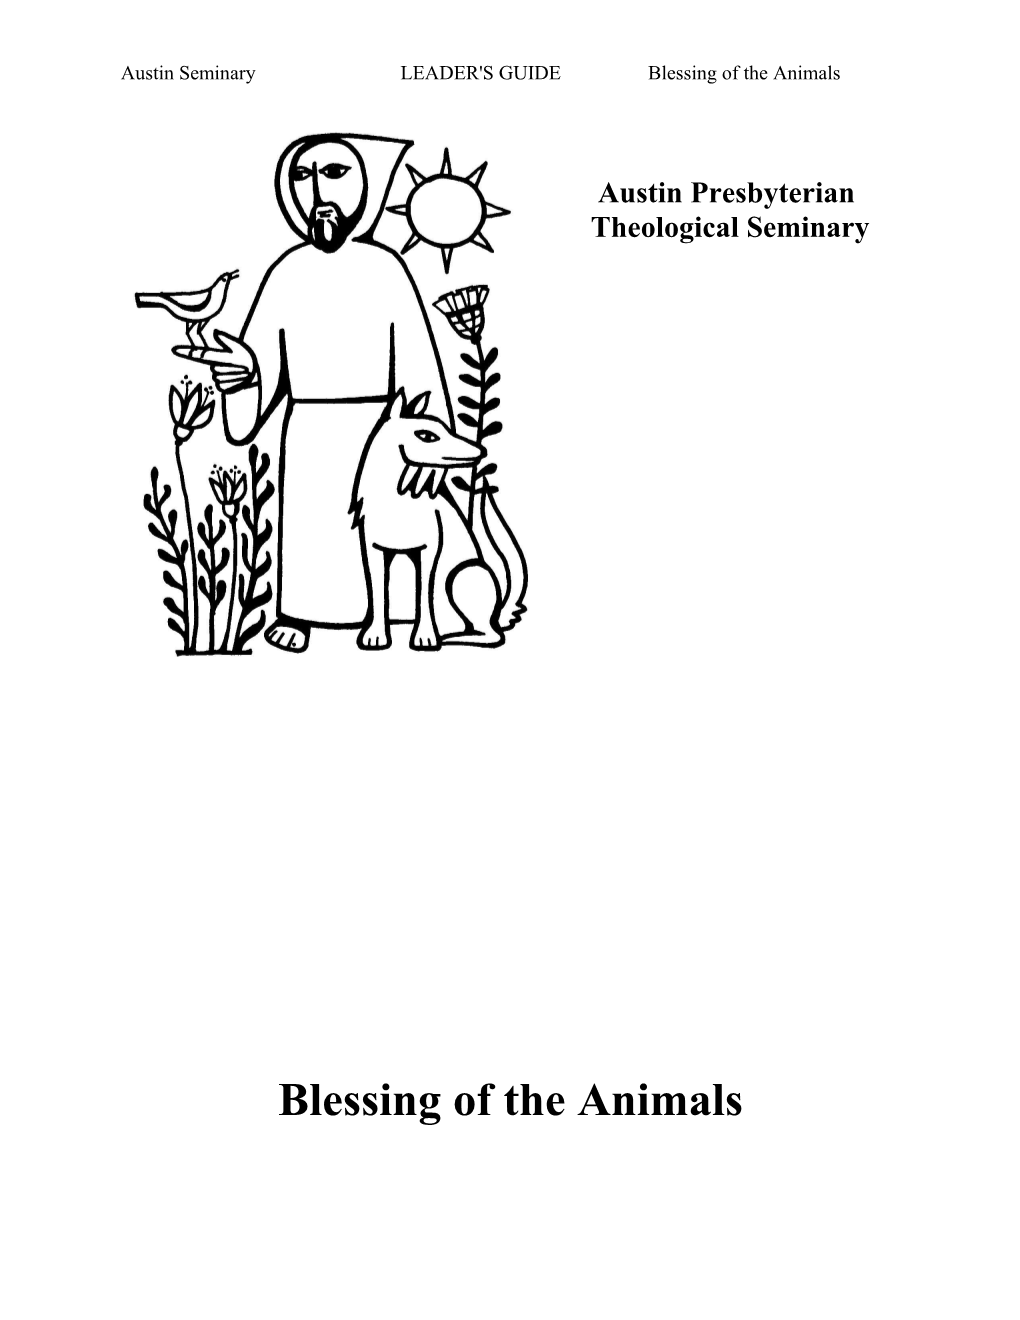 Austin Seminaryleader's Guideblessing of the Animals